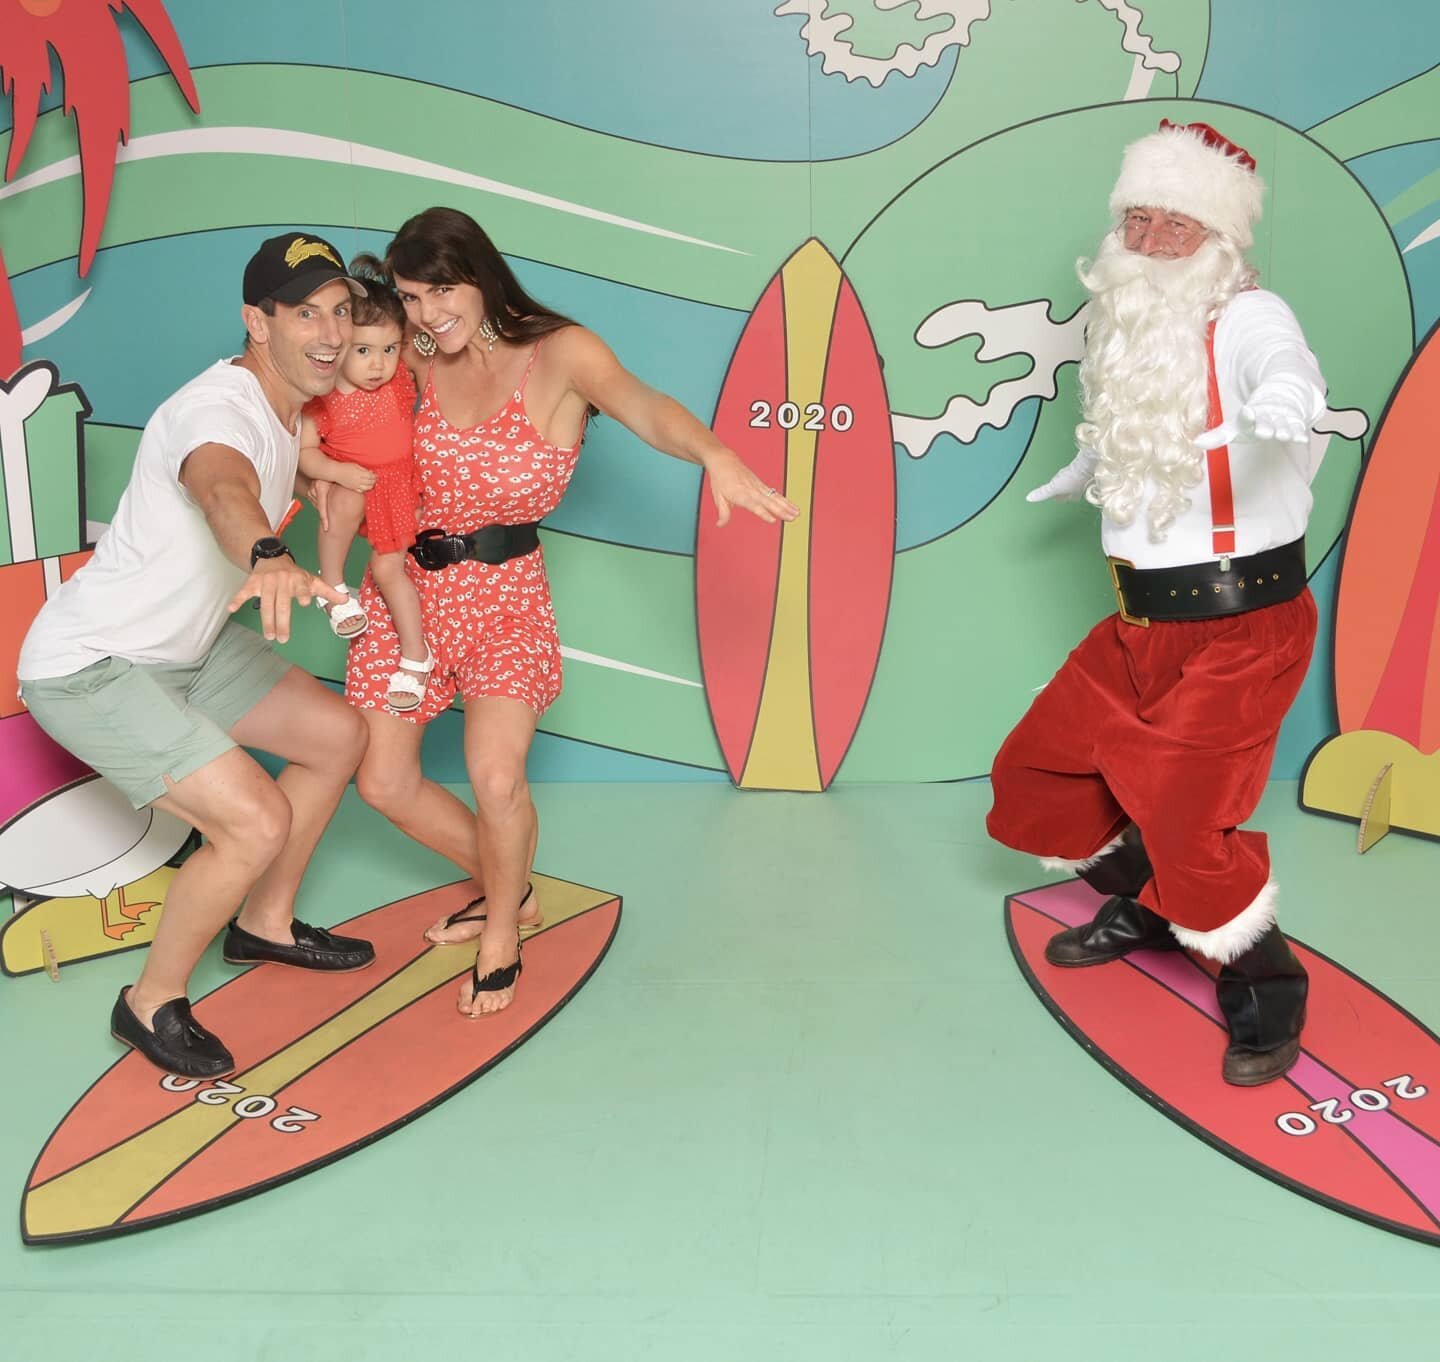 Social Distance Santa 😄🎅🎄 I thought #surfingsanta was such a creative way to do the annual family Christmas 📷

Good job 👍@kawanashoppingworld 2020 certainly has been different! 

Isabella was a little unsure but no tears lol Santa also commented